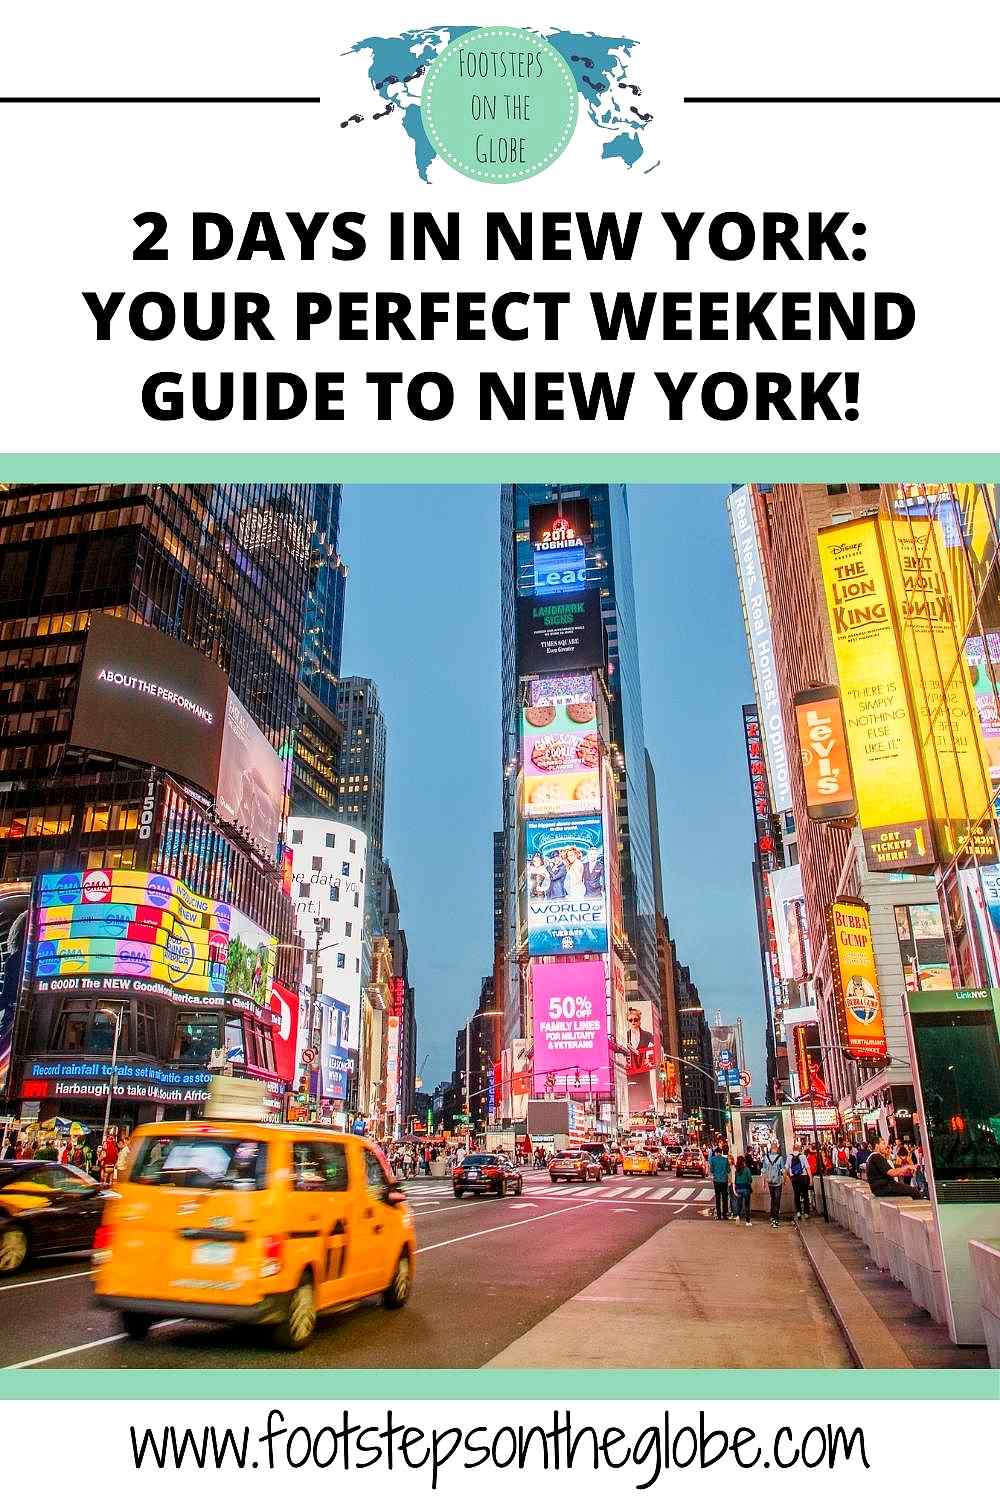 Pinterest image of Times Square in New York with the text: "2 DAYS IN NEW YORK: Perfect Weekend Guide to New York"